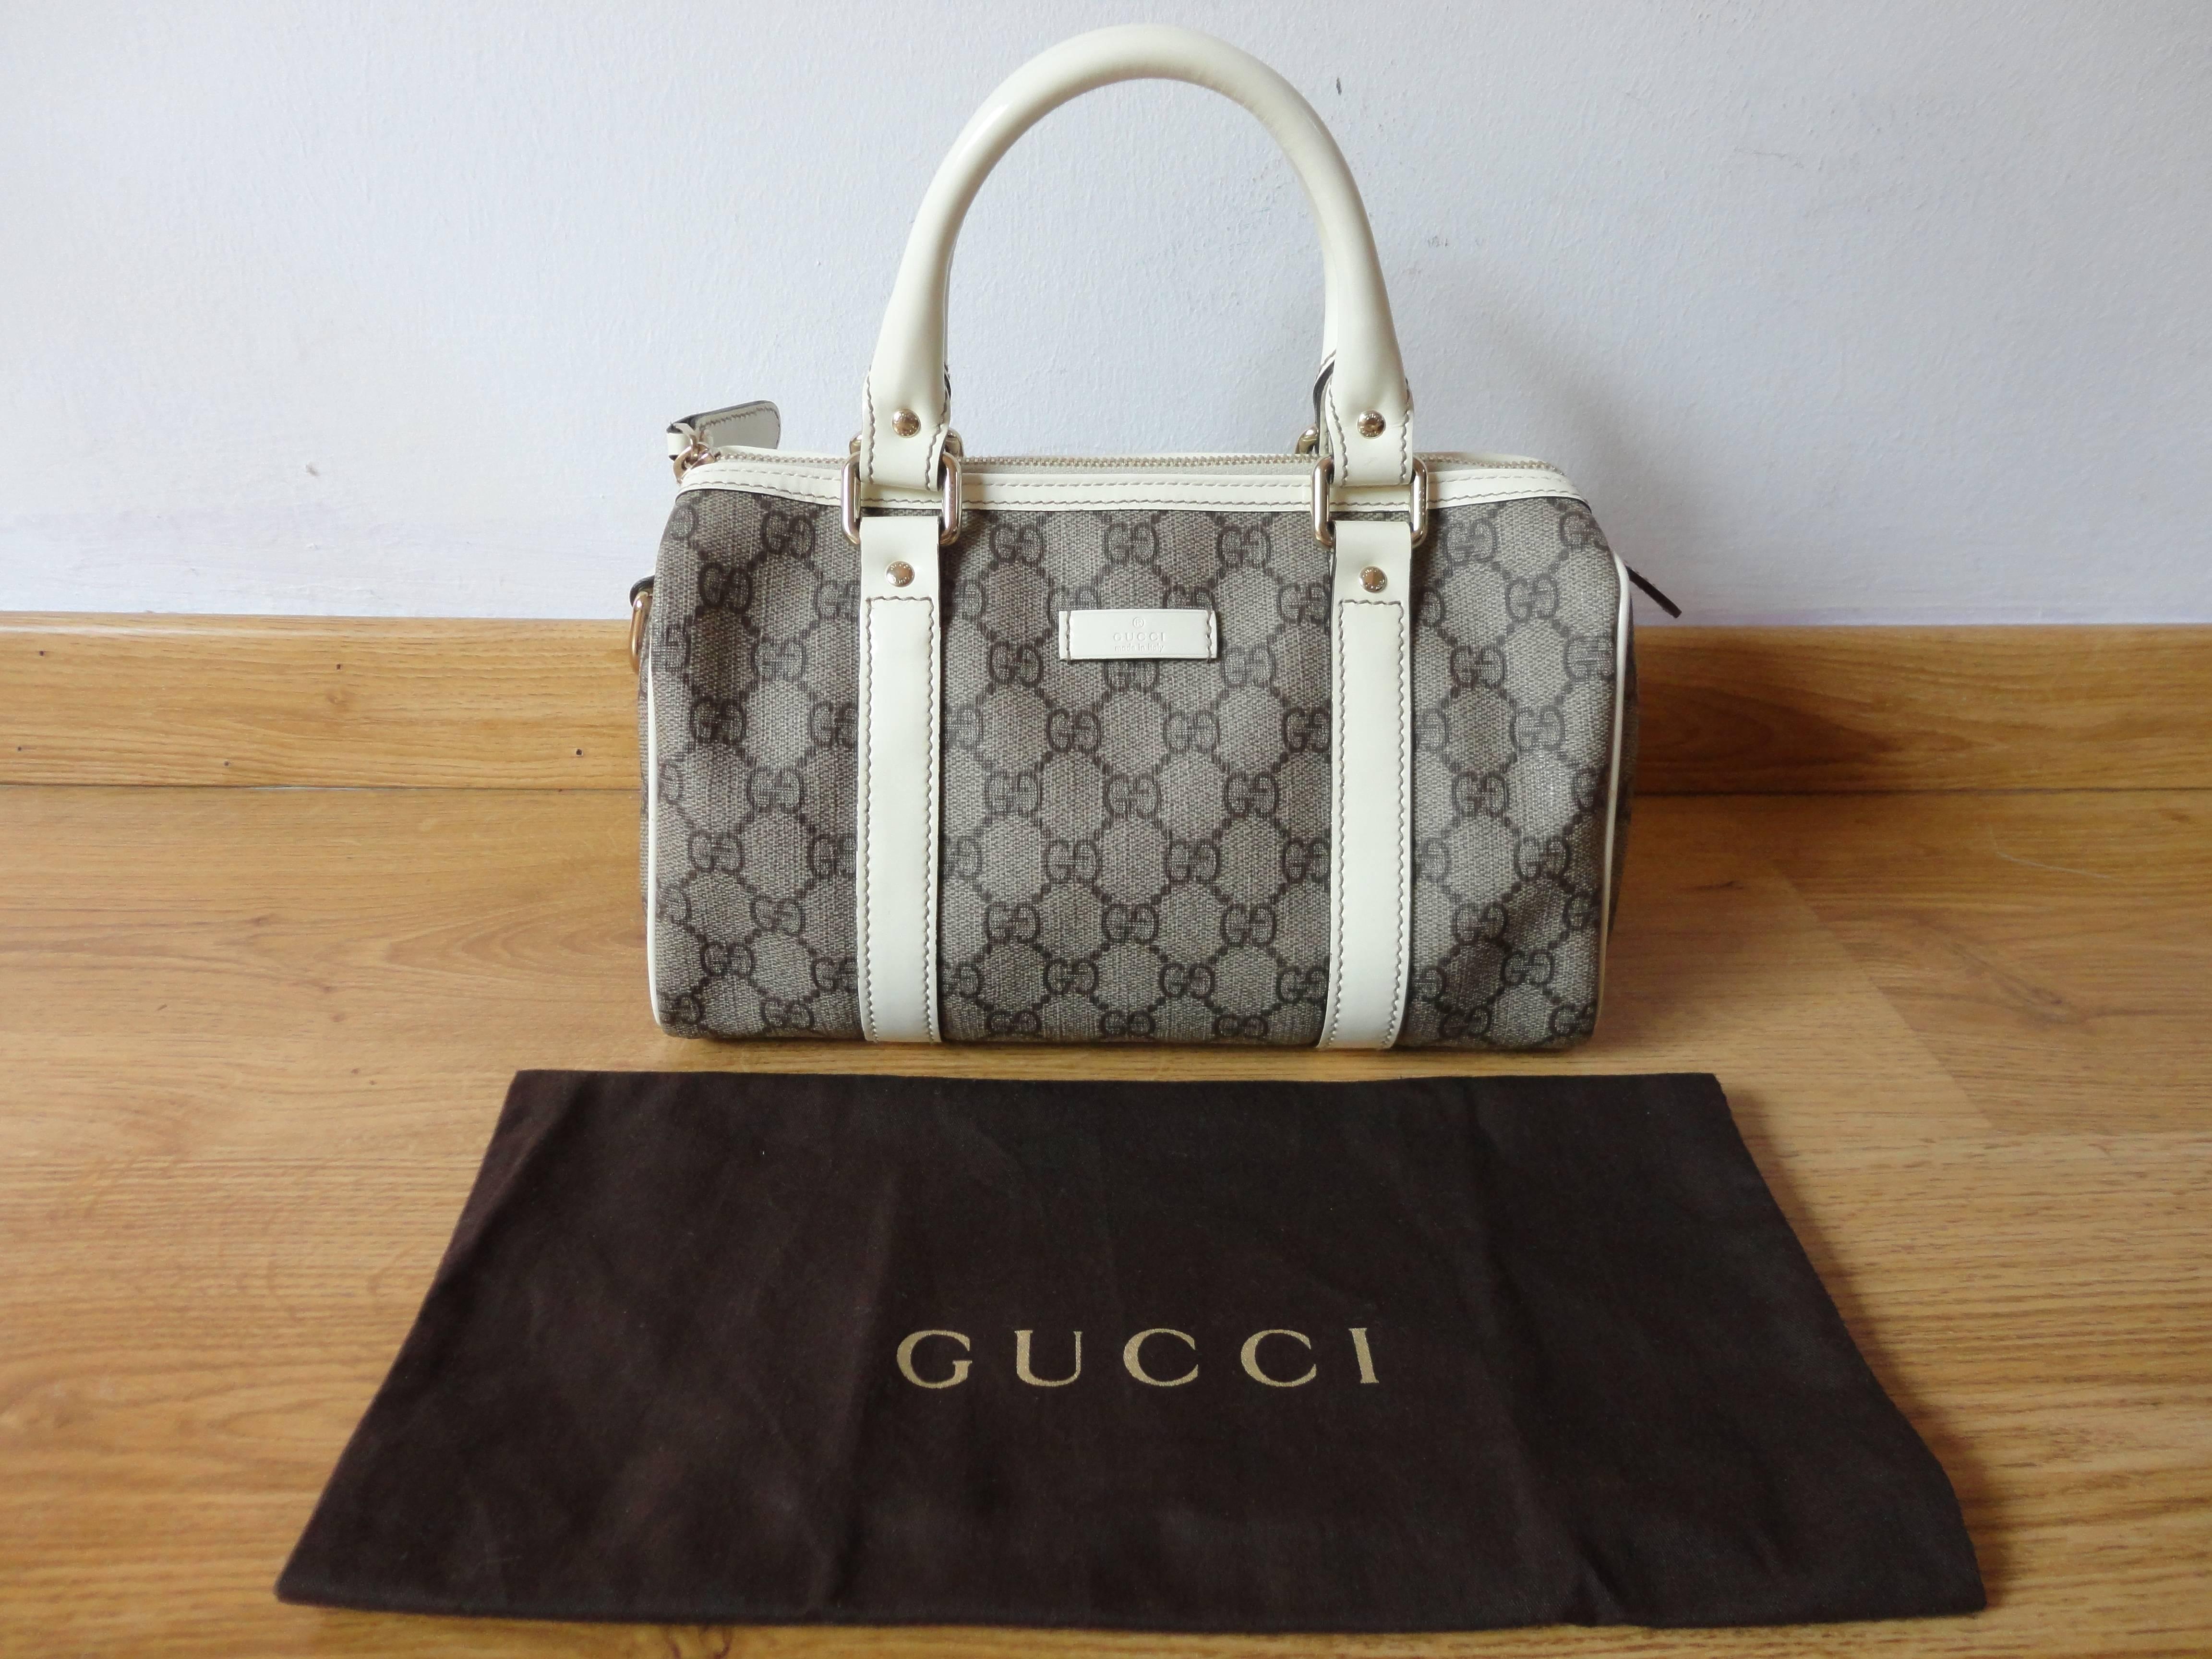 Amazing GUCCI GG Monogram Small Joy Boston. The bag features white cowhide leather trim and rolled top handles with polished gold hardware. The top zipper opens to a dark brown fabric interior with a pocket.
MINT condition, as it was never